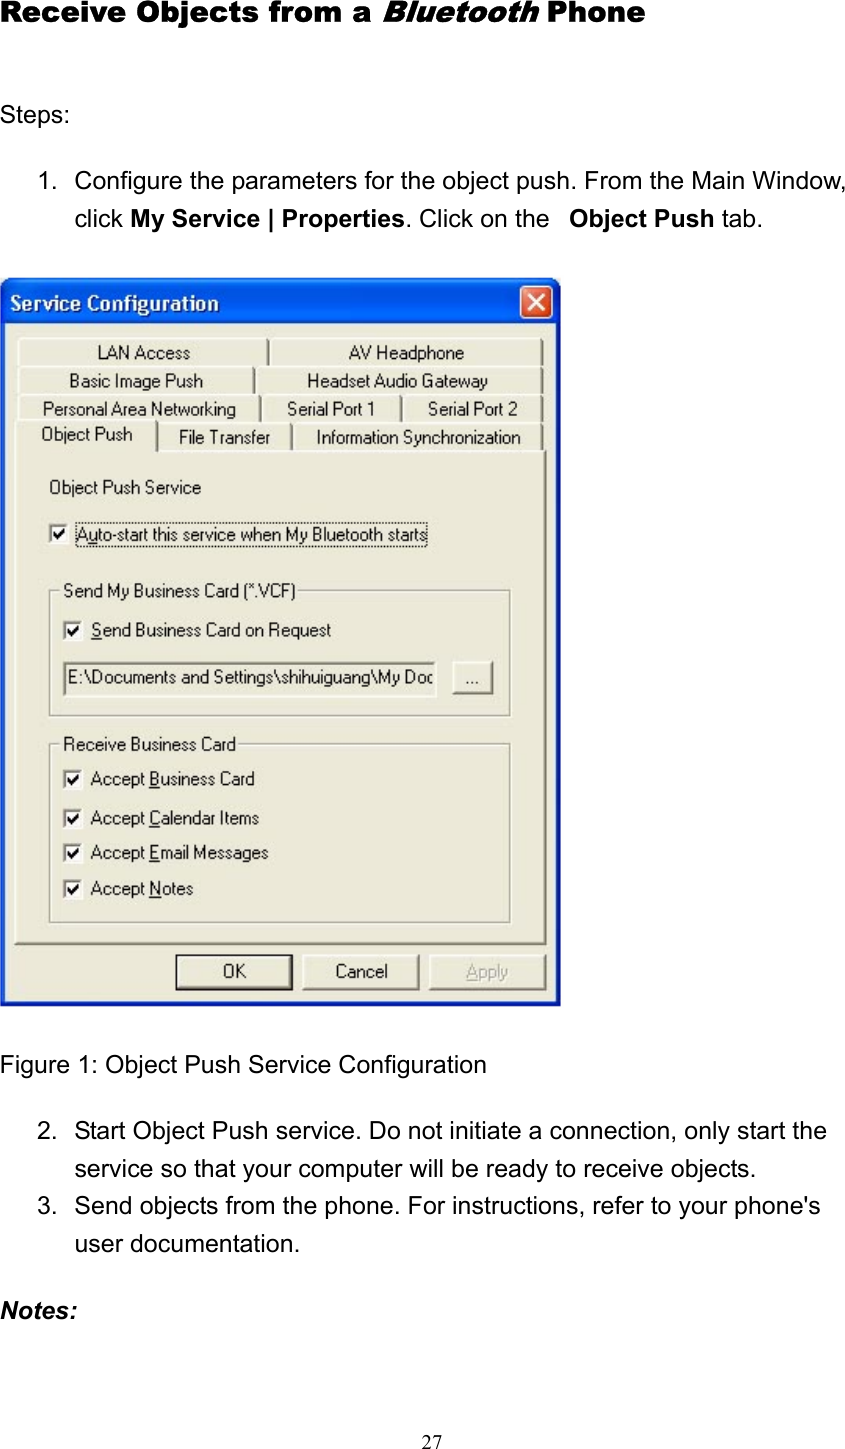   27Receive Objects from a Bluetooth Phone Steps: 1.  Configure the parameters for the object push. From the Main Window, click My Service | Properties. Click on the   Object Push tab.   Figure 1: Object Push Service Configuration 2.  Start Object Push service. Do not initiate a connection, only start the service so that your computer will be ready to receive objects.   3.  Send objects from the phone. For instructions, refer to your phone&apos;s user documentation.   Notes: 